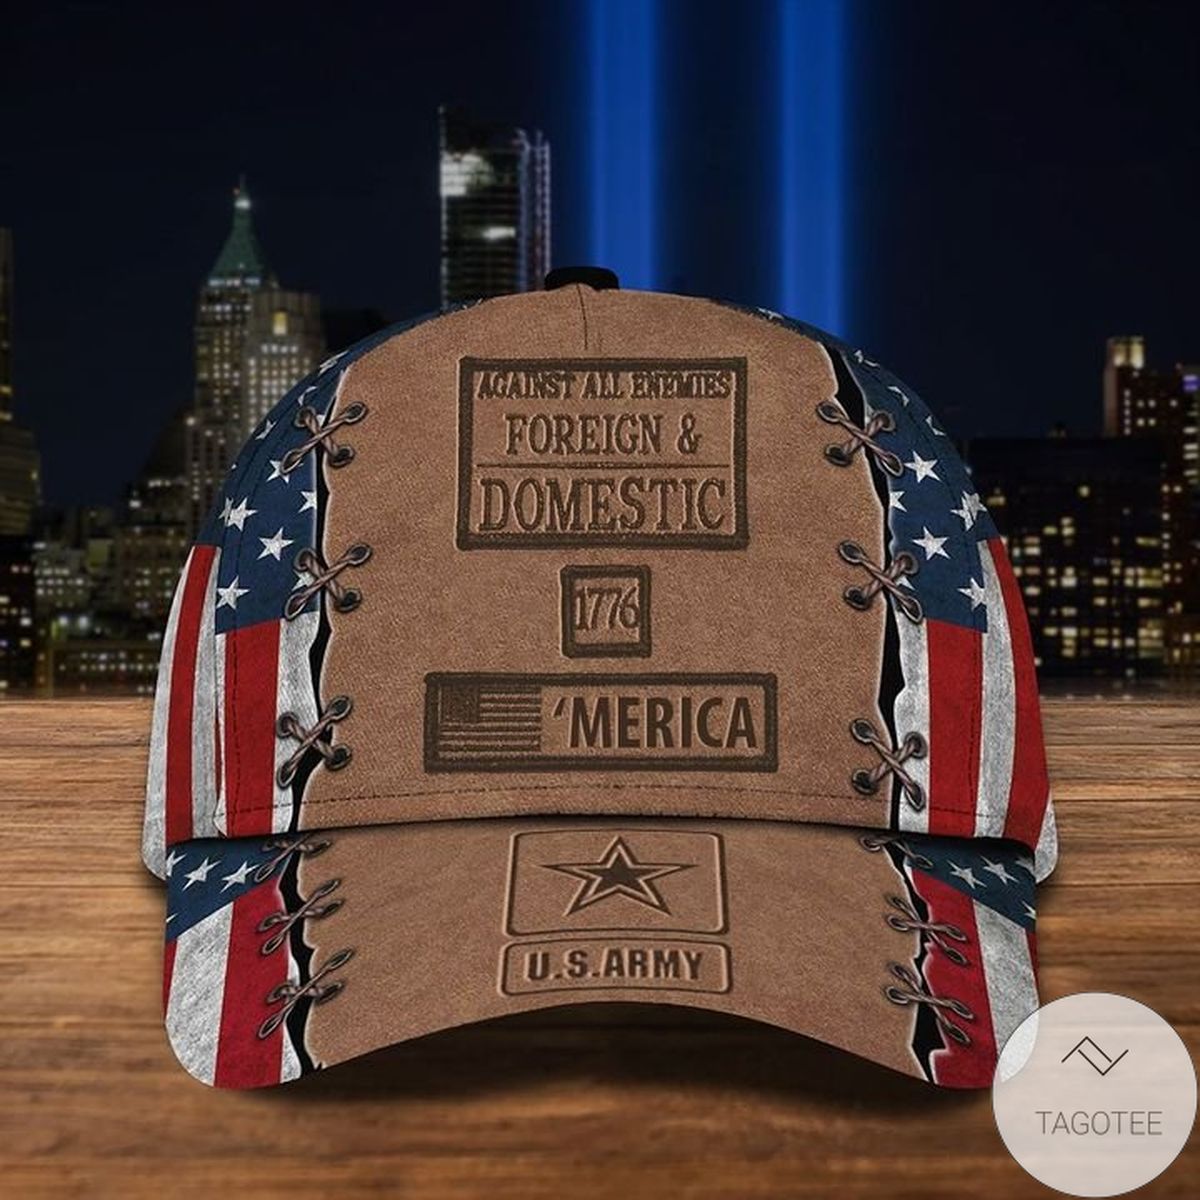 US Army Hat Patriotic 1776 'Merica Against All Enemies Foreign & Domestic Army Veterans Gift